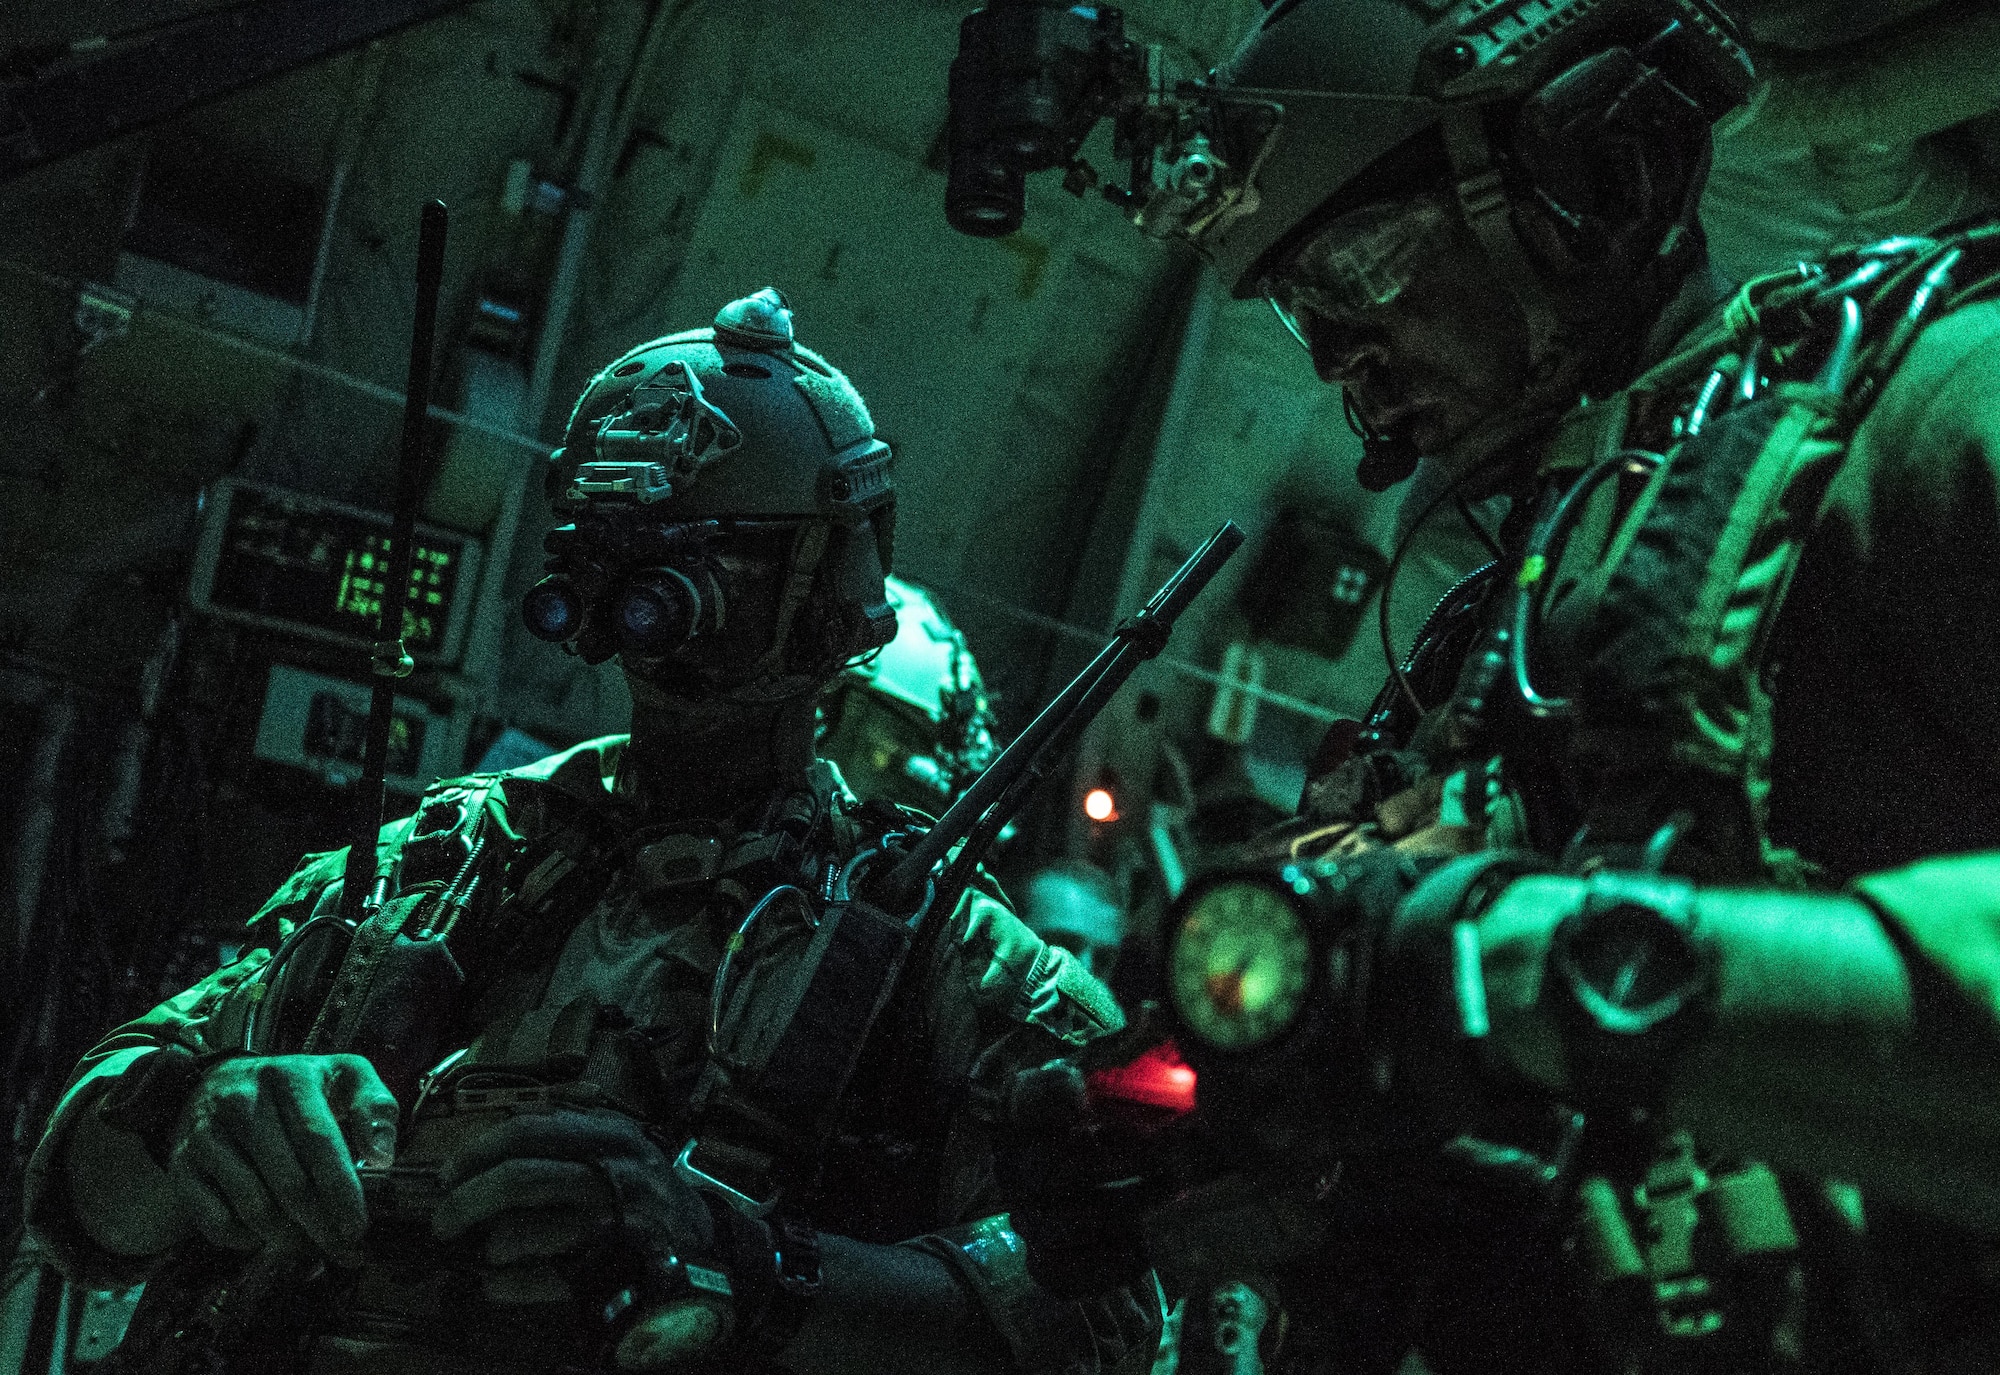 U.S. Air Force 320th Special Tactics Squadron jumpmasters prepare for high altitude, high opening (HAHO) jump operations July 11, 2017, over Shoalwater Bay Training Area in Queensland, Australia during Talisman Saber 2017. The 320th STS combat controllers and U.S. Marine Corps 3rd Reconnaissance Battalion operators infilled two days prior to the exercise’s massive tactical (MASS TAC) airdrop of 500 jumpers in order to establish the drop zone. (U.S. Air Force photo by Capt. Jessica Tait)